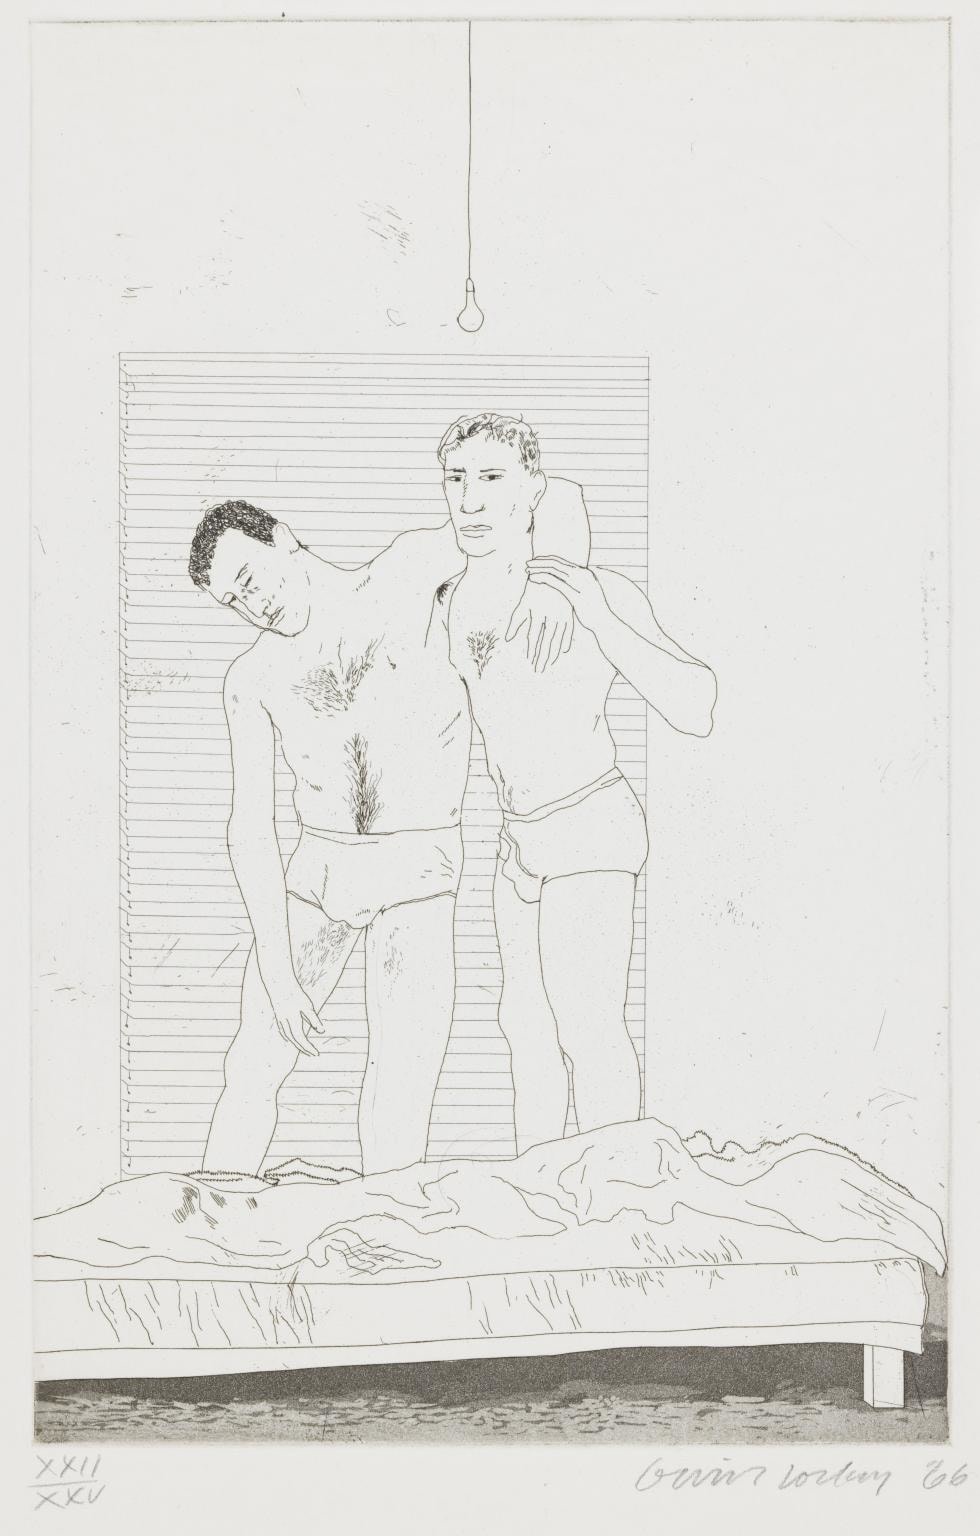 David Hockney, One Night, 1966, Etching and aquatint on paper, 13 13/16&quot; &times; 8 7/8&quot; at Anita Rogers Gallery